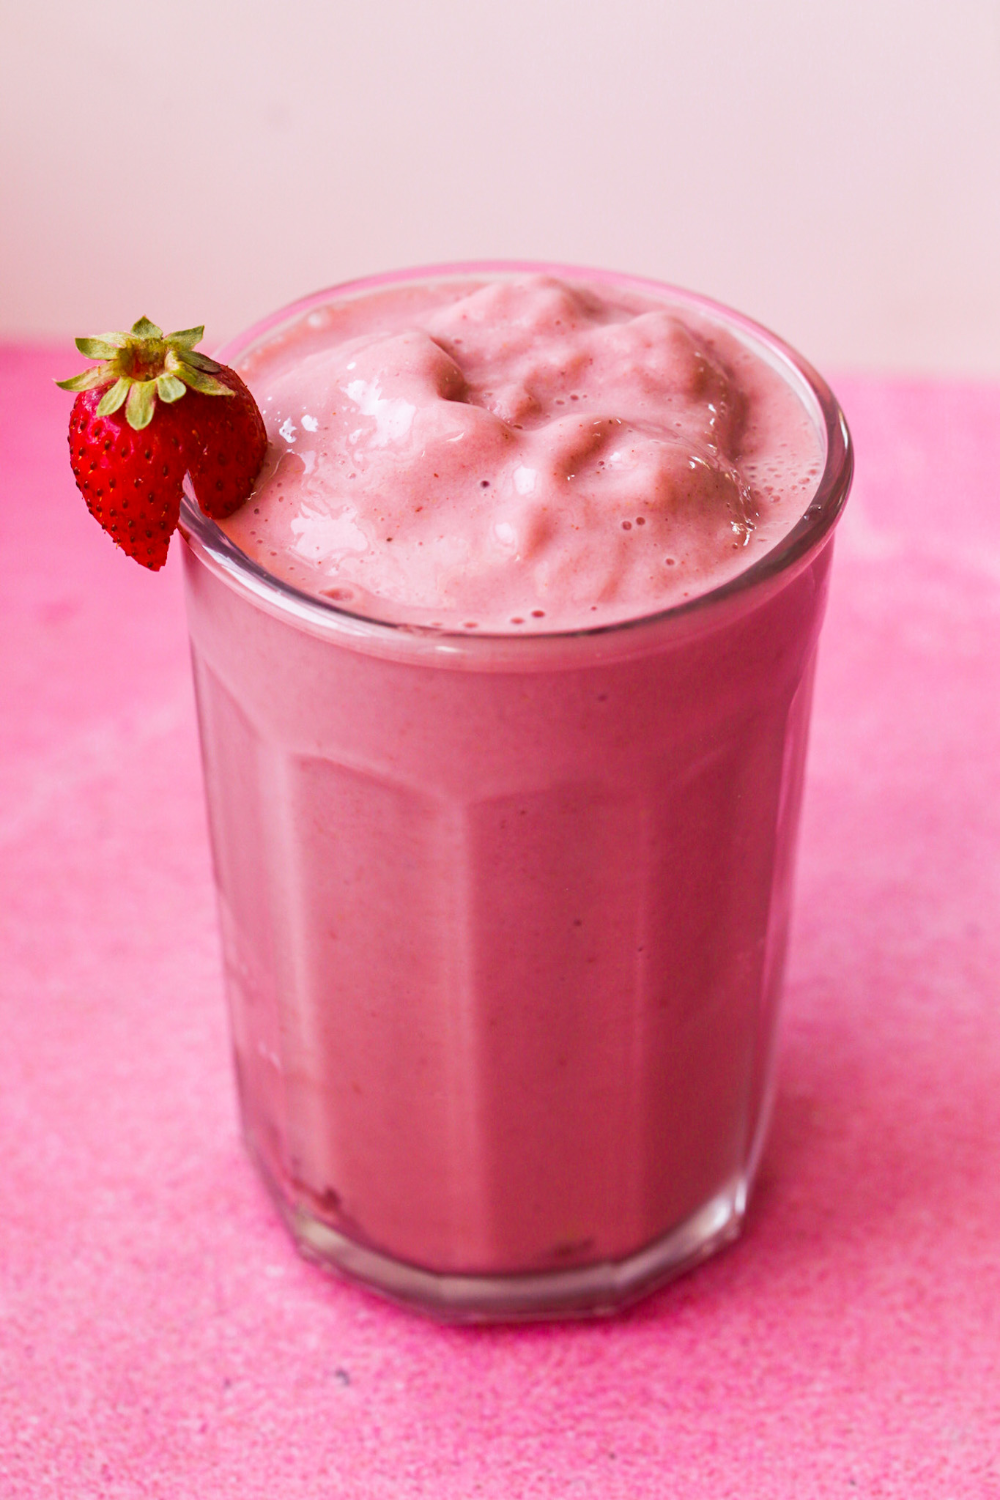 (The Best) Strawberry Banana Smoothie